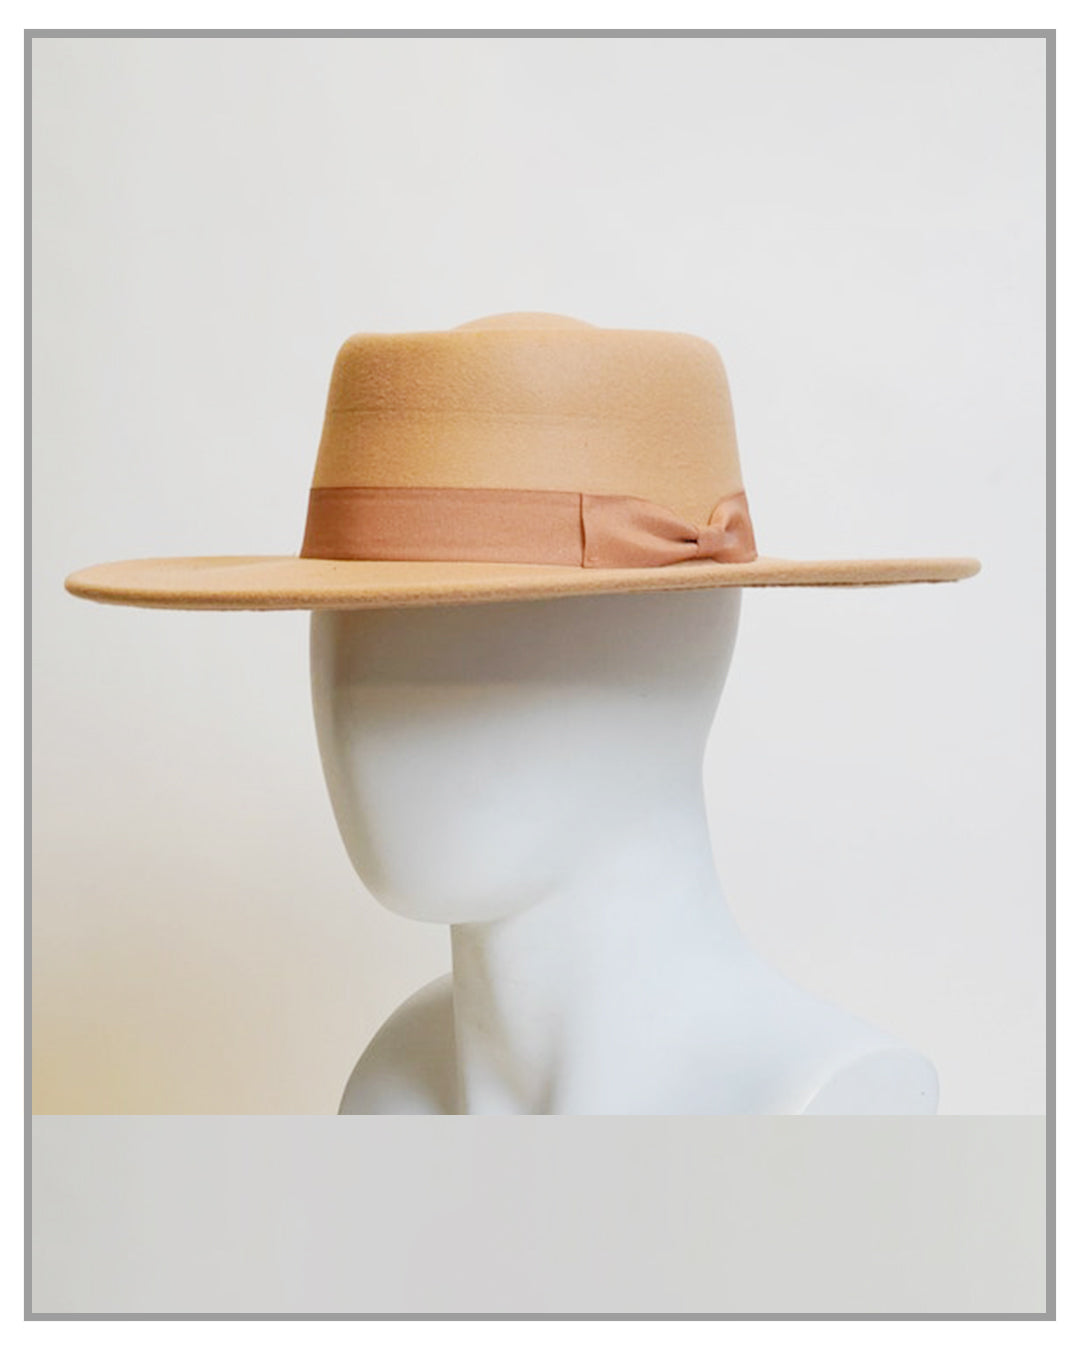 Apricot Fedora Boater Hat with Ribbon